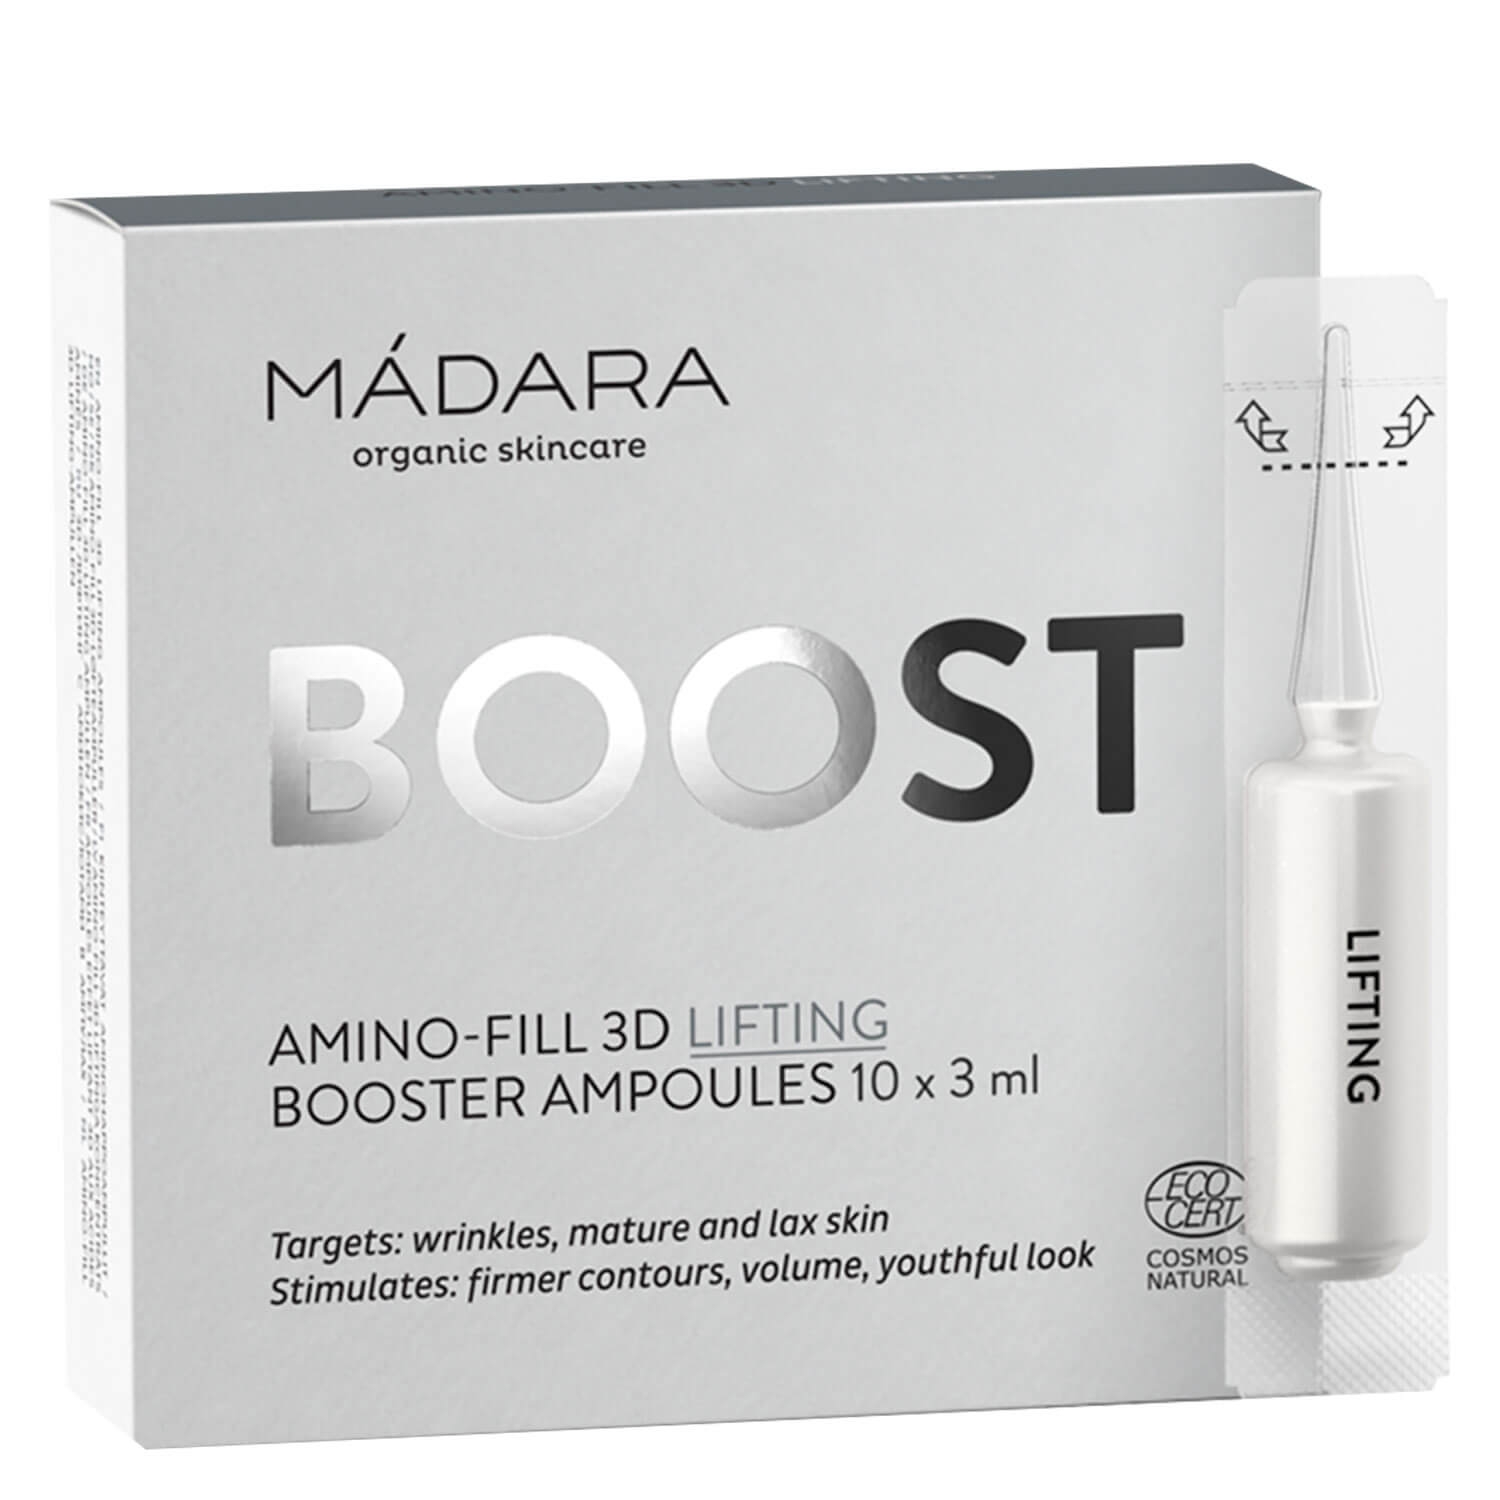 Produktbild von MÁDARA Care - Amino-Fill 3D Lifting Booster Ampoules